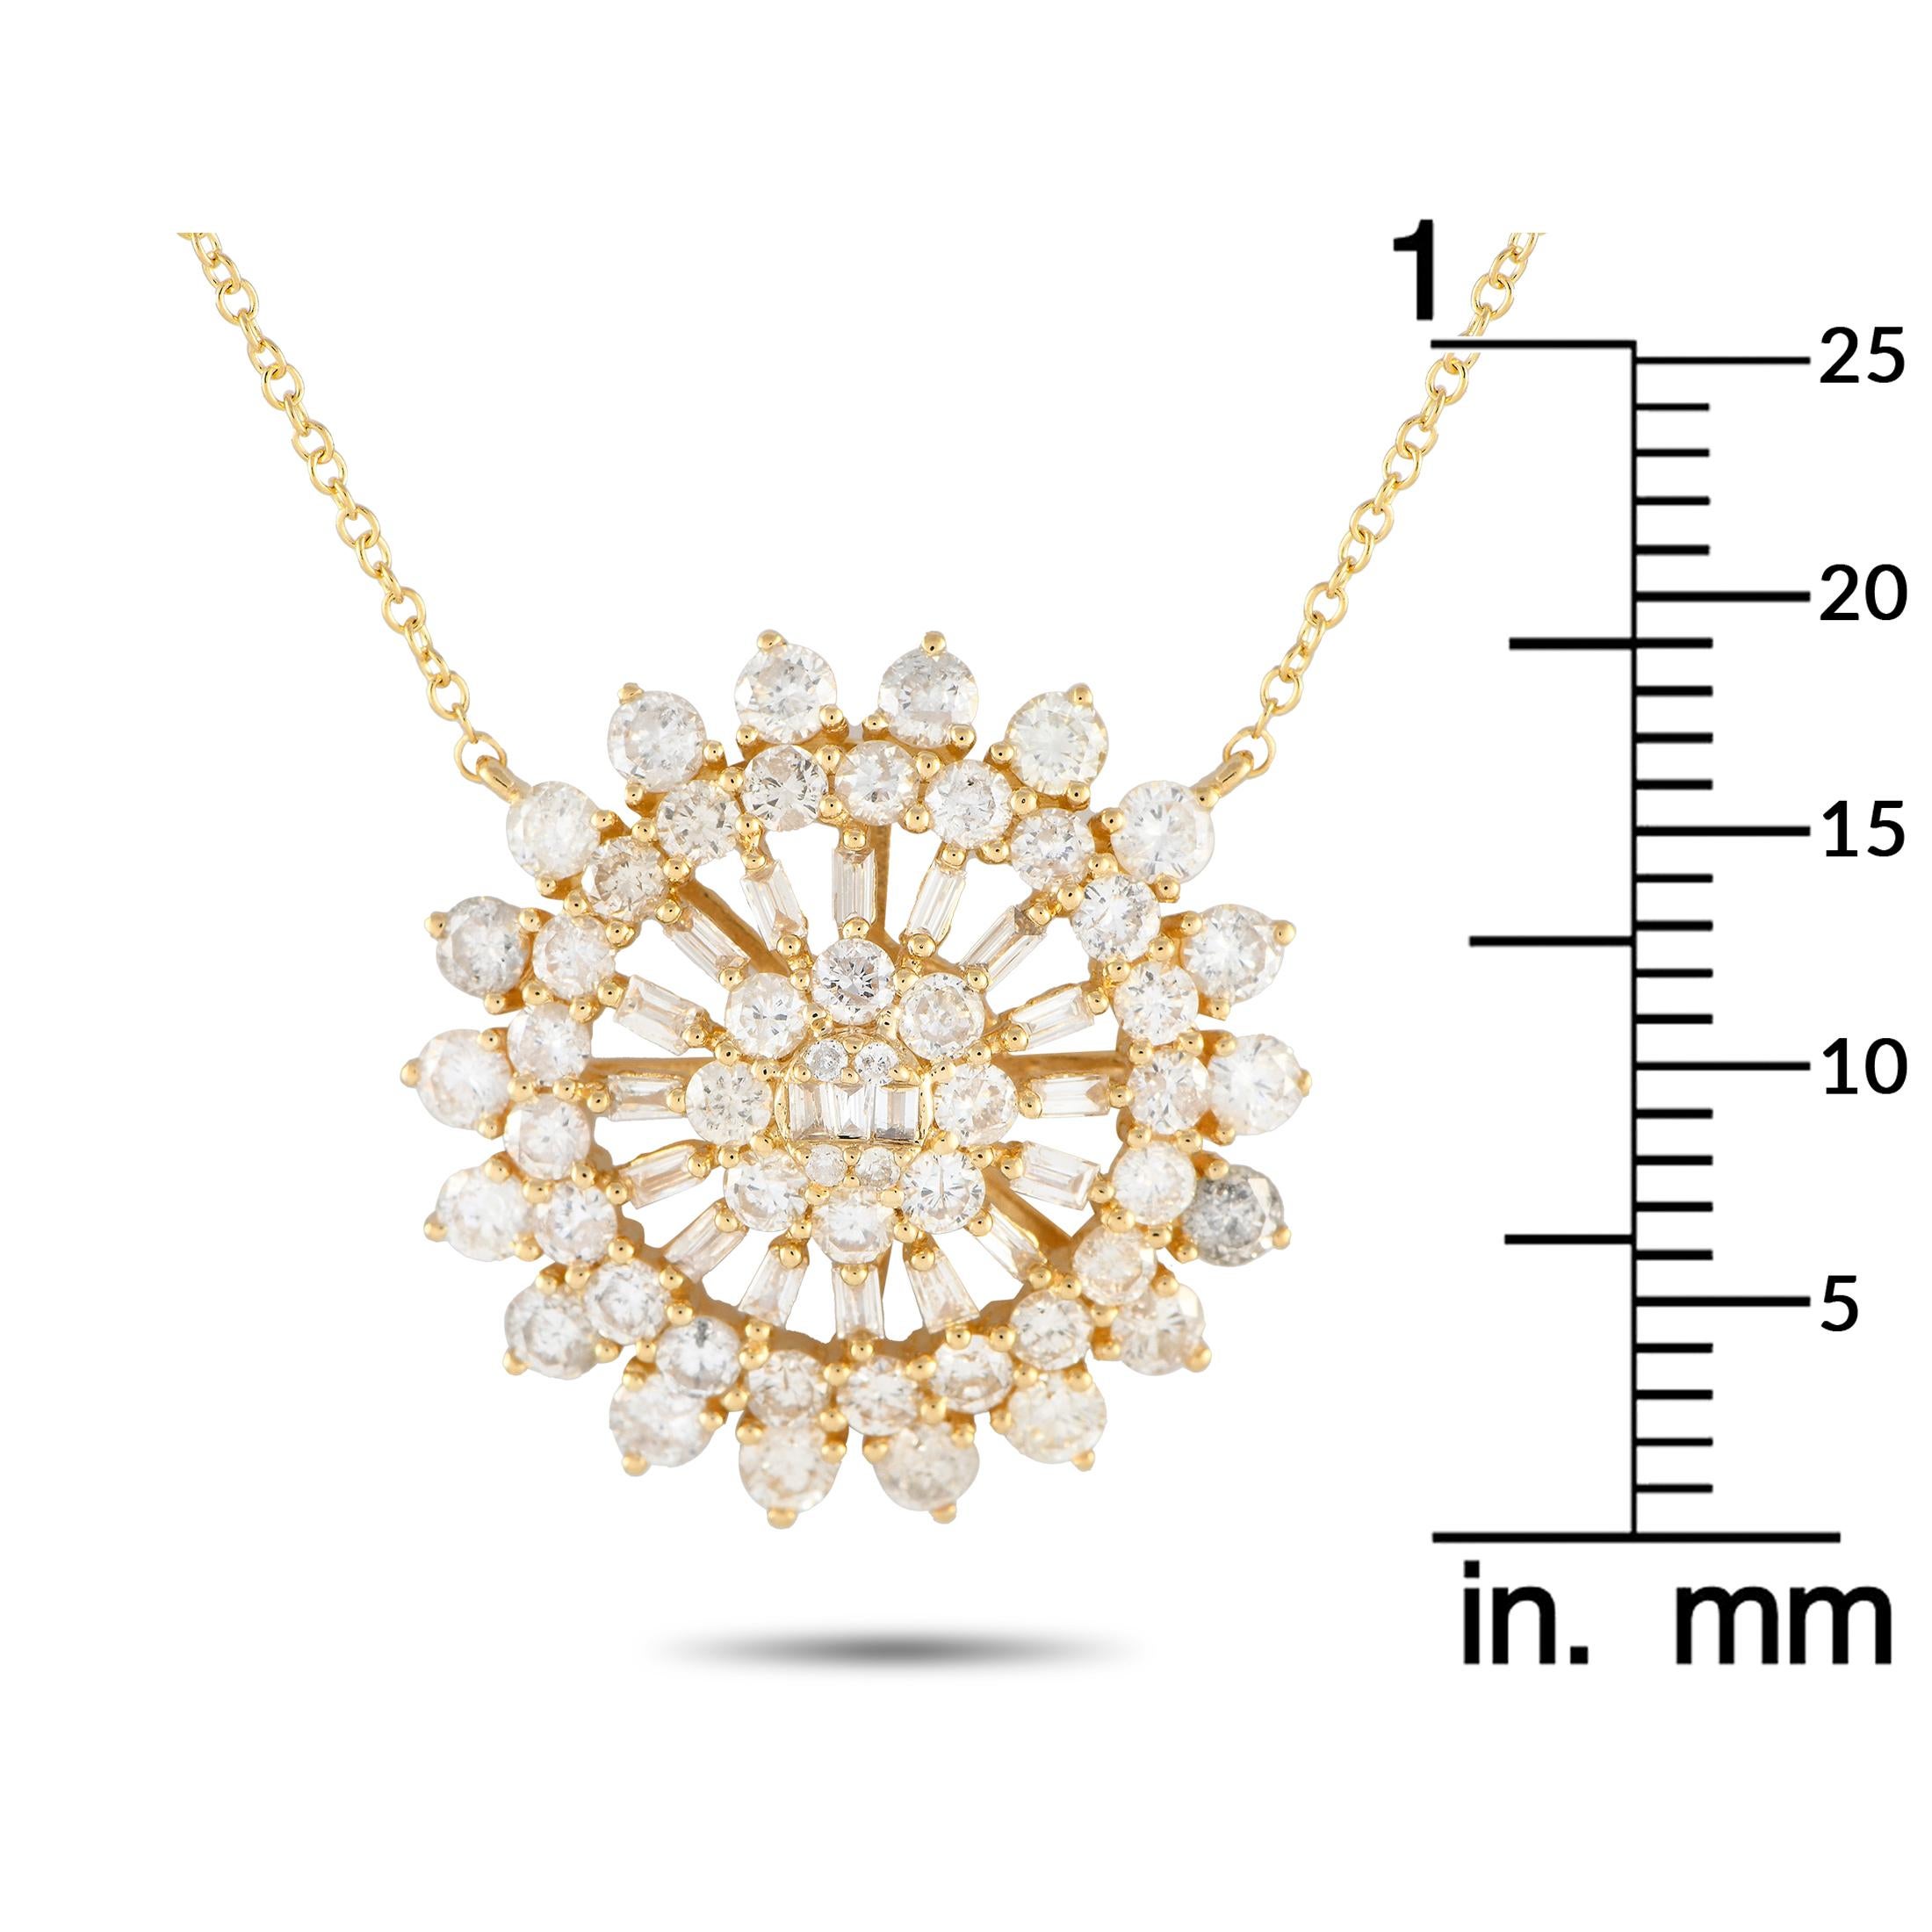 14K Yellow Gold 1.75ct Diamond Sunburst Necklace PN15250-Y In New Condition For Sale In Southampton, PA